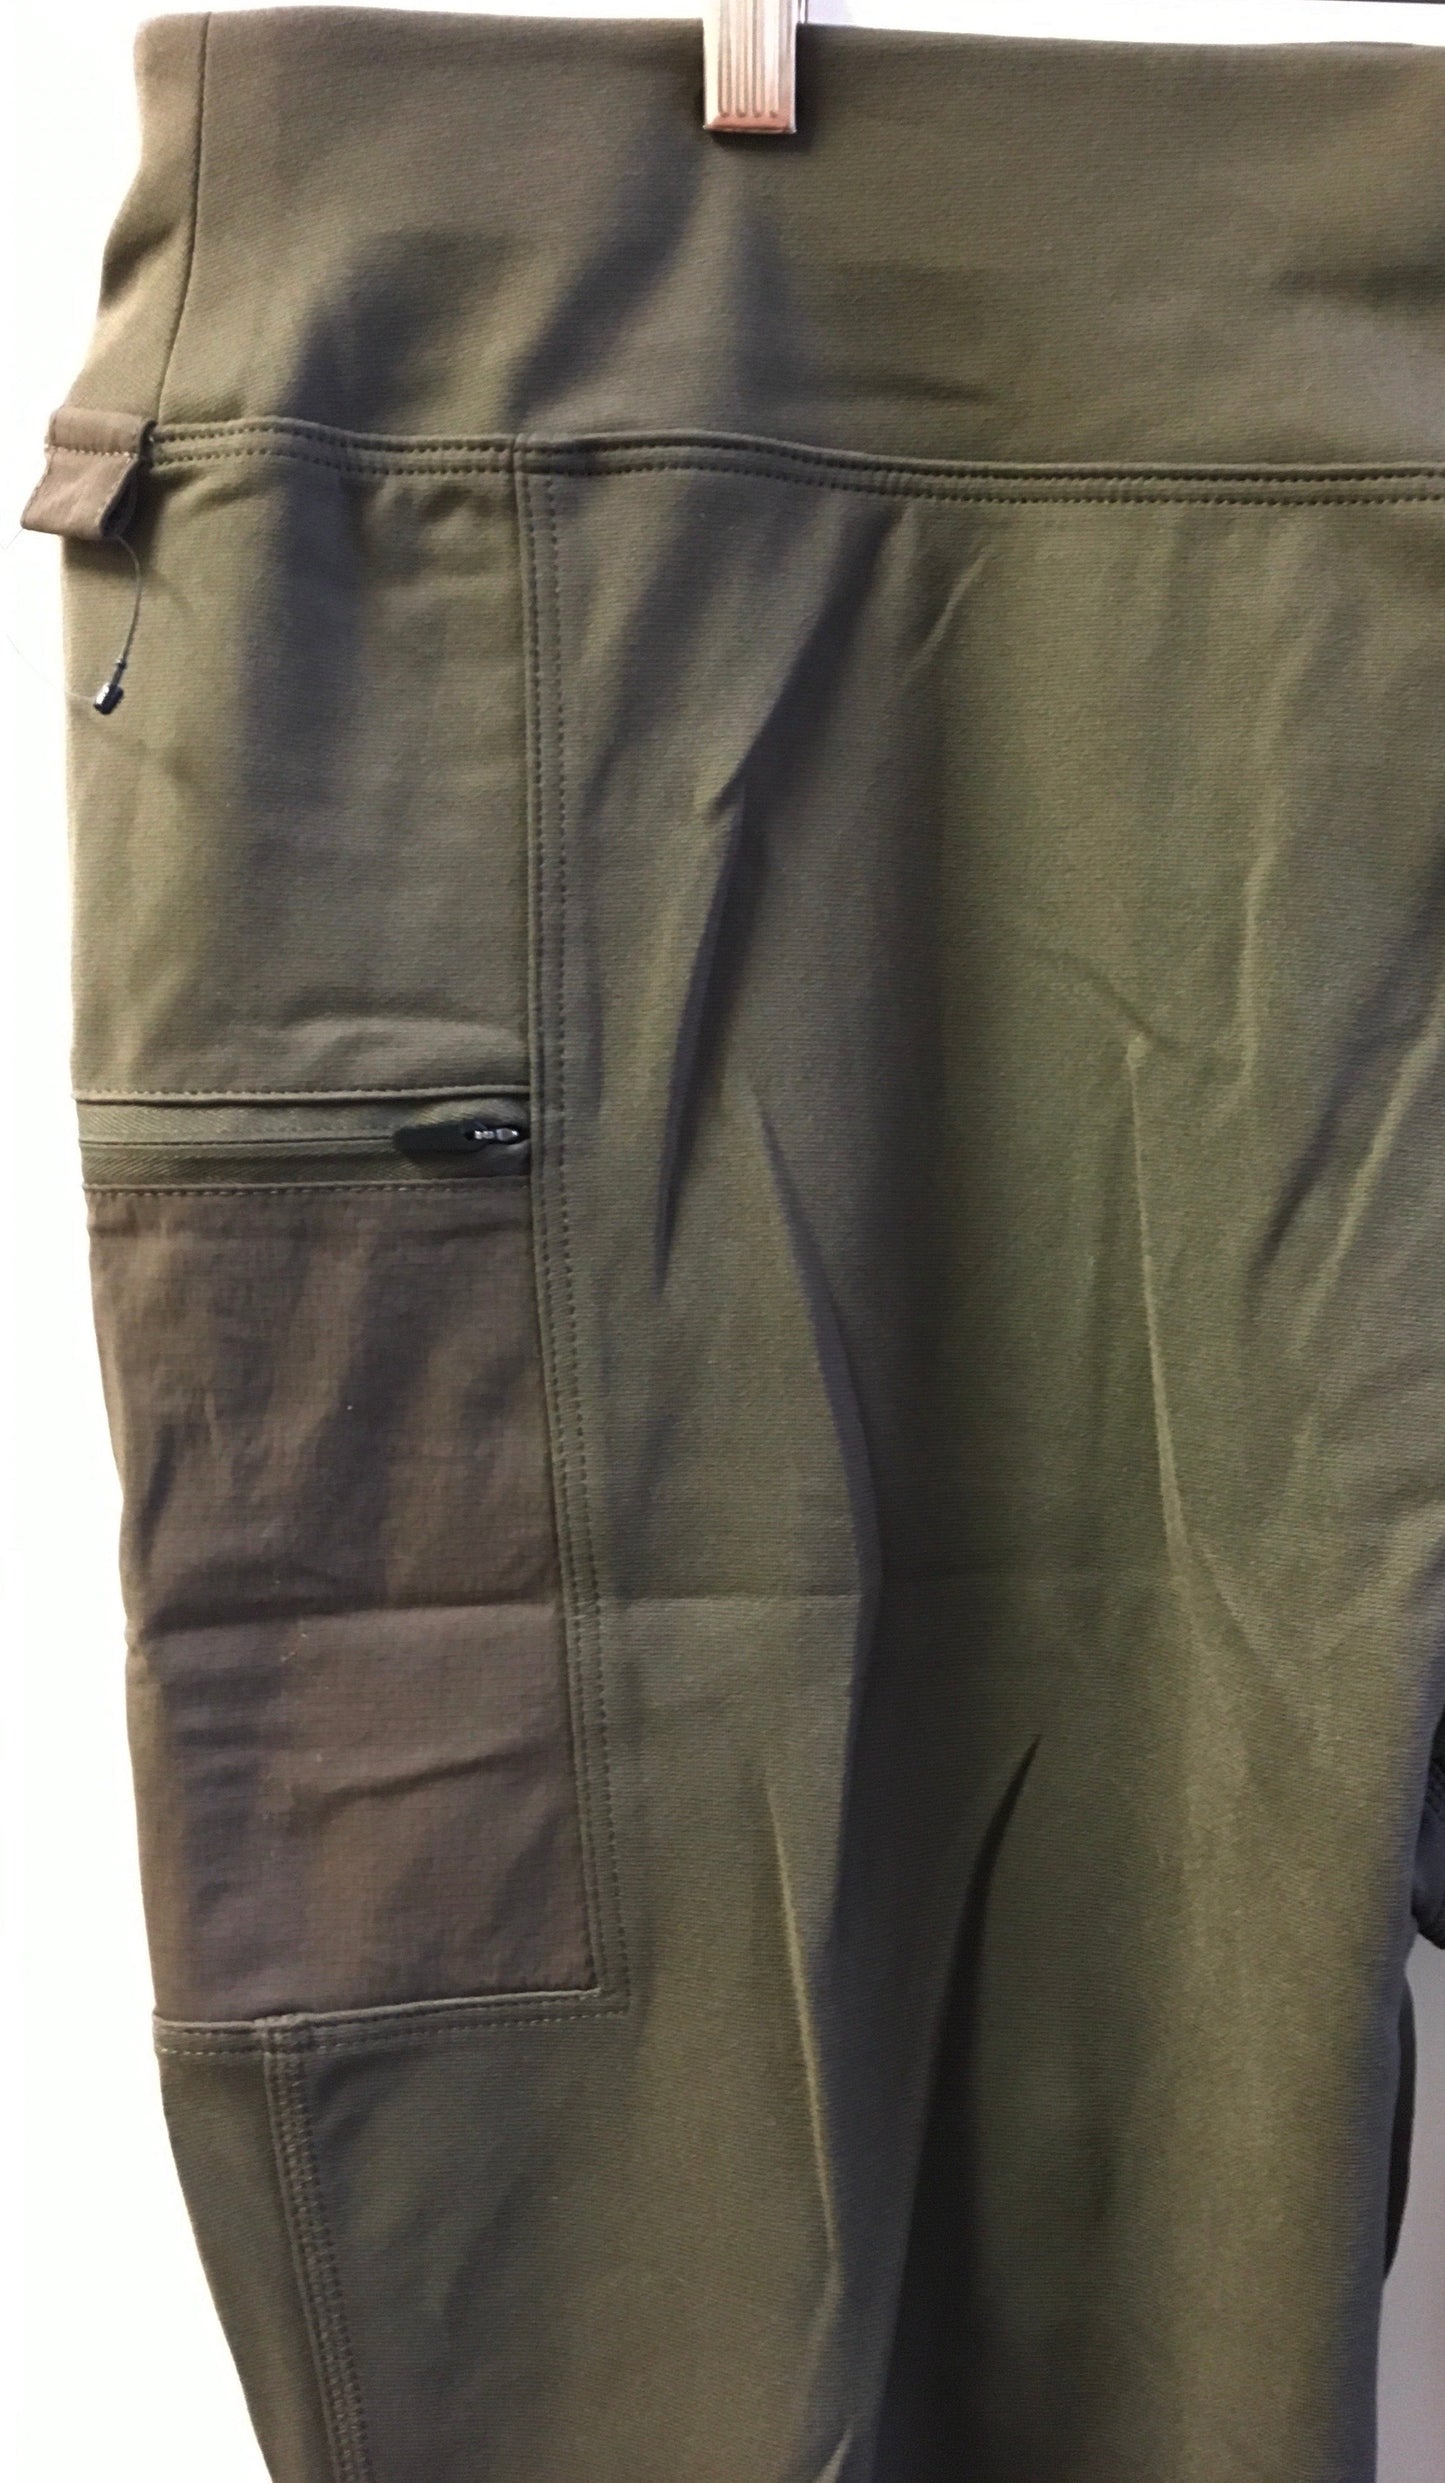 Pants Ankle By Carhart  Size: Xxl